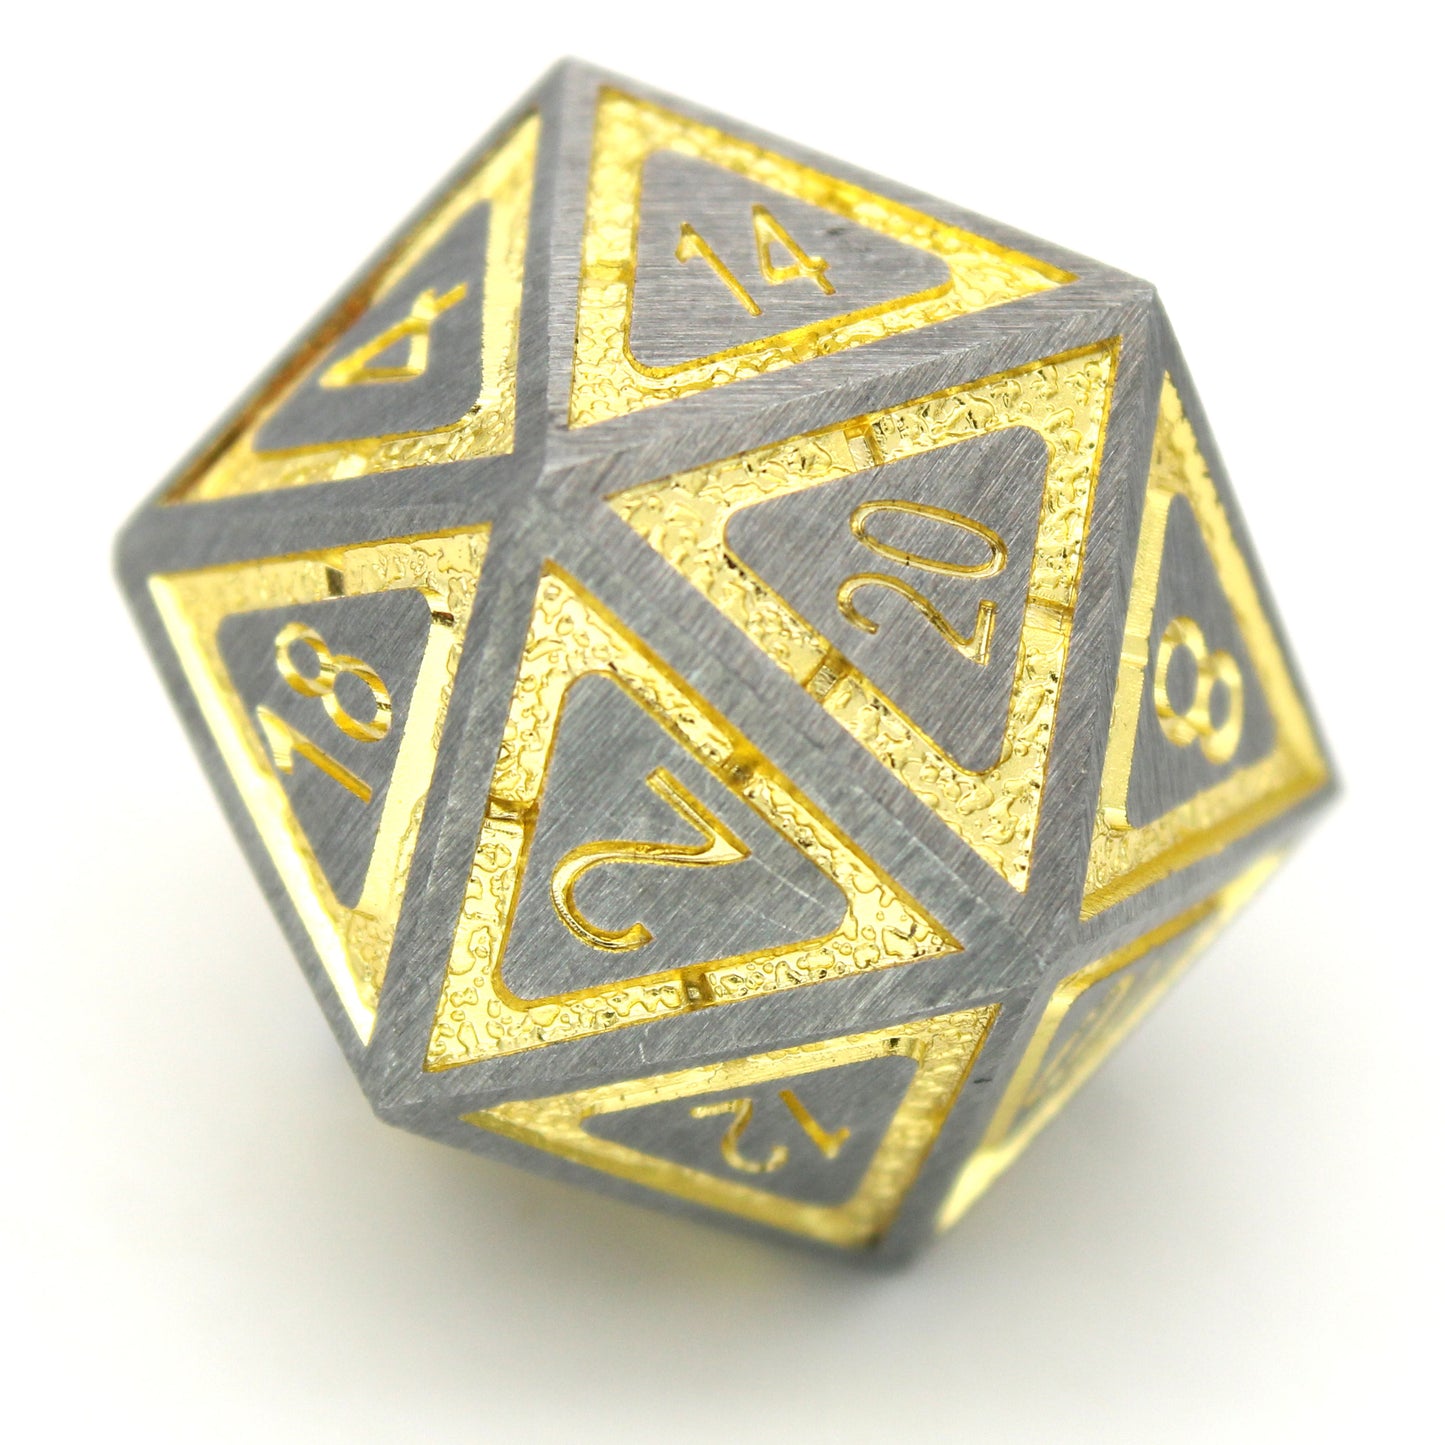 Ore Core is an 8-piece metal set featuring geometric channels of textured golden yellow enamel running through a frosted steel frame. Perfect for your next sci-fi campaign!